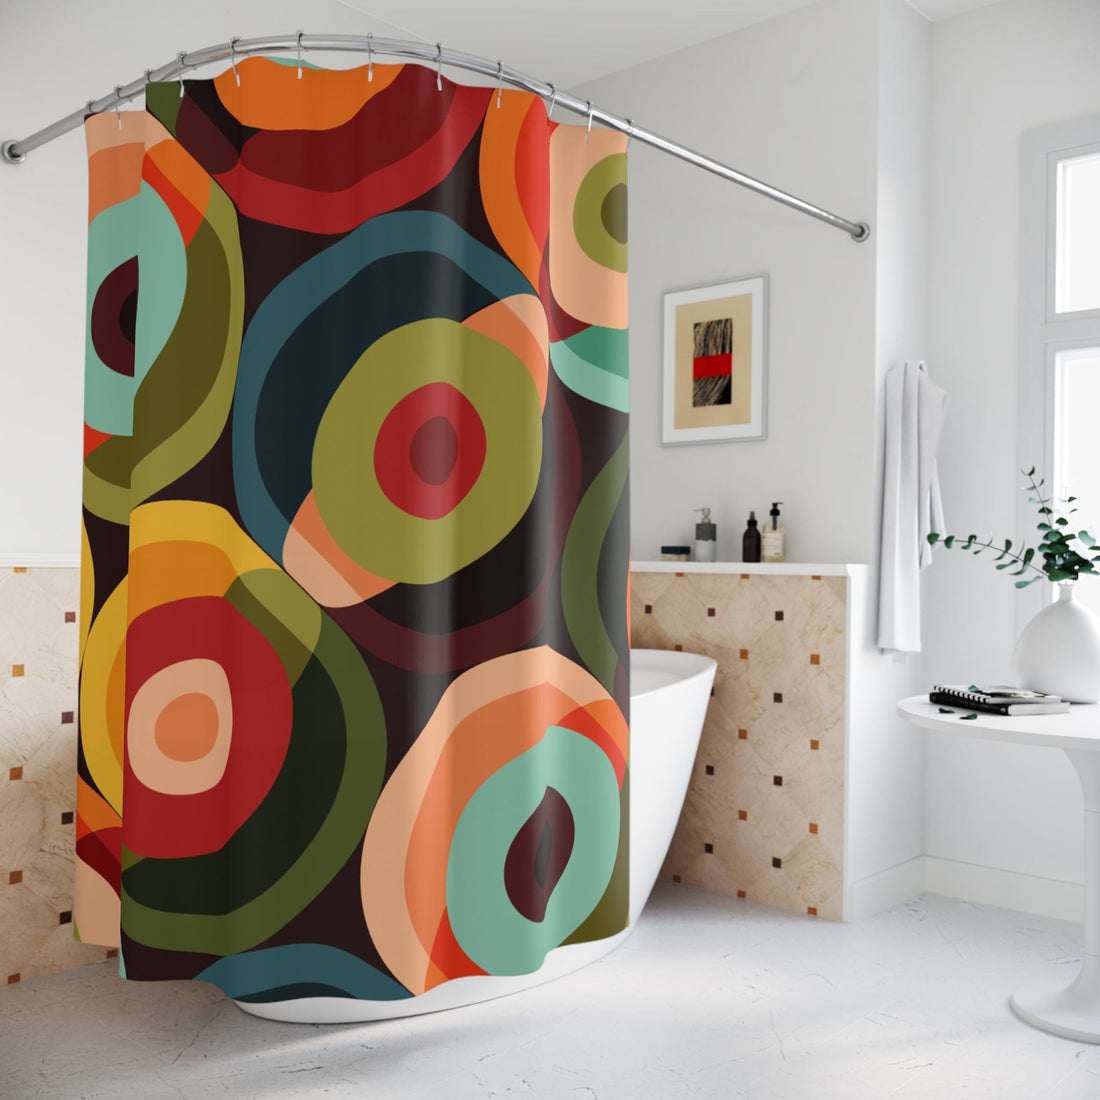 Kate McEnroe New York 70s Psychedelic Geometric Shower Curtain, Retro Colorful Circle Orb Abstract Bathroom Curtains - 13379123Shower CurtainsS40 - RED - ORB - 7X7